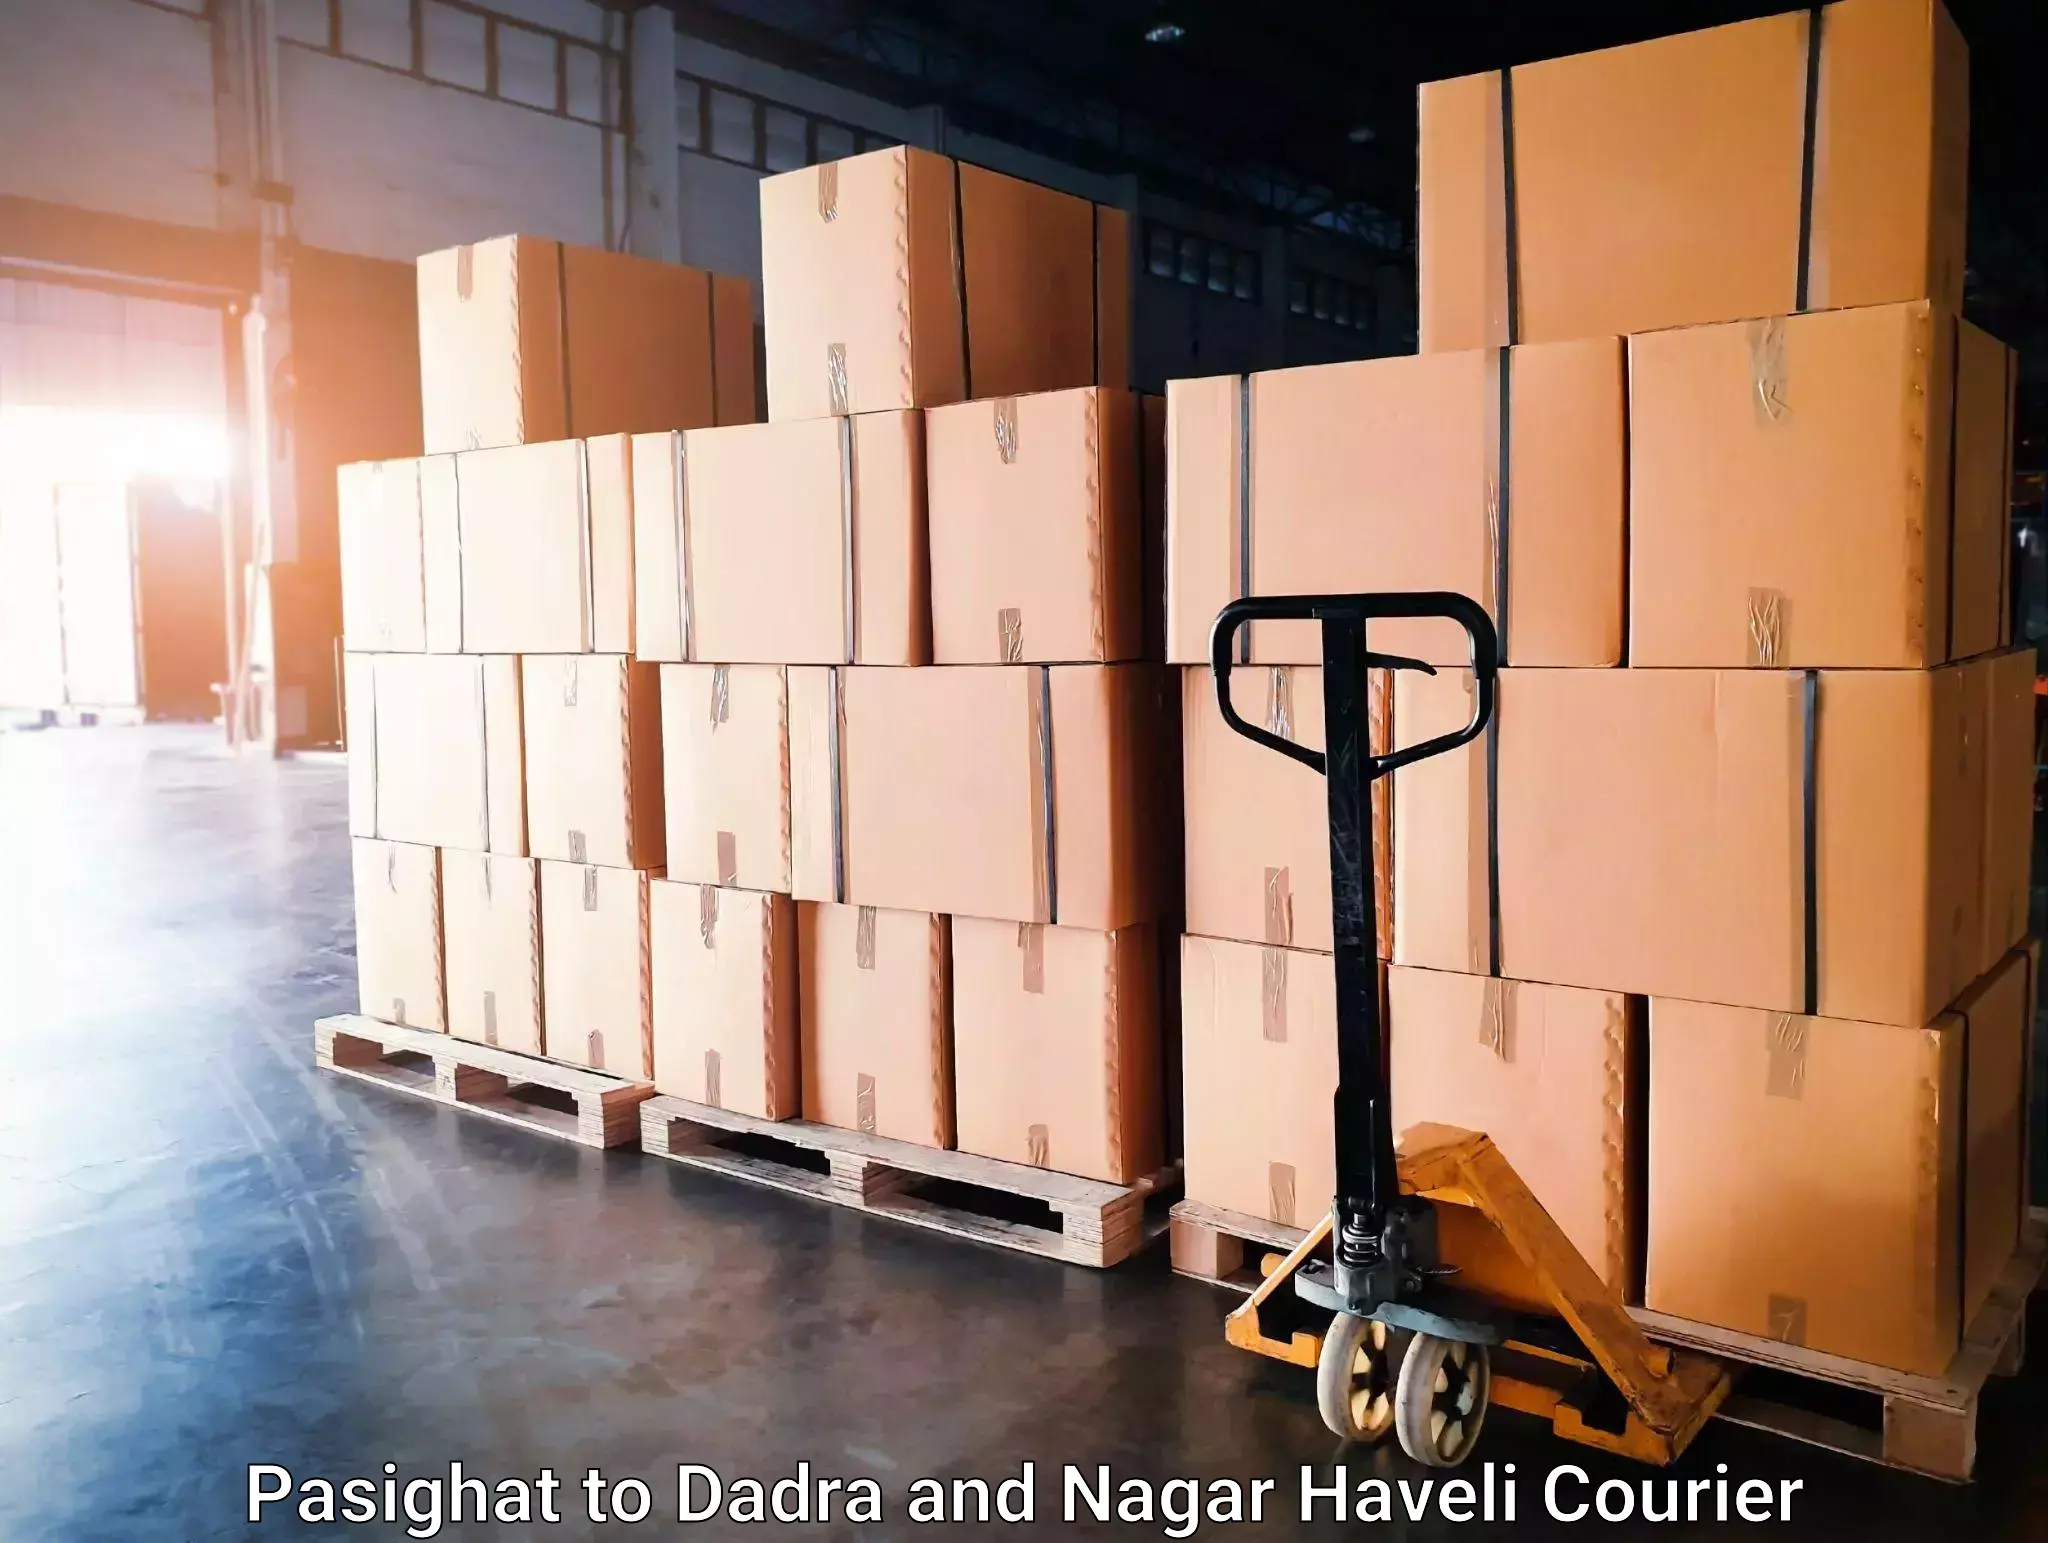 Overnight delivery in Pasighat to Dadra and Nagar Haveli